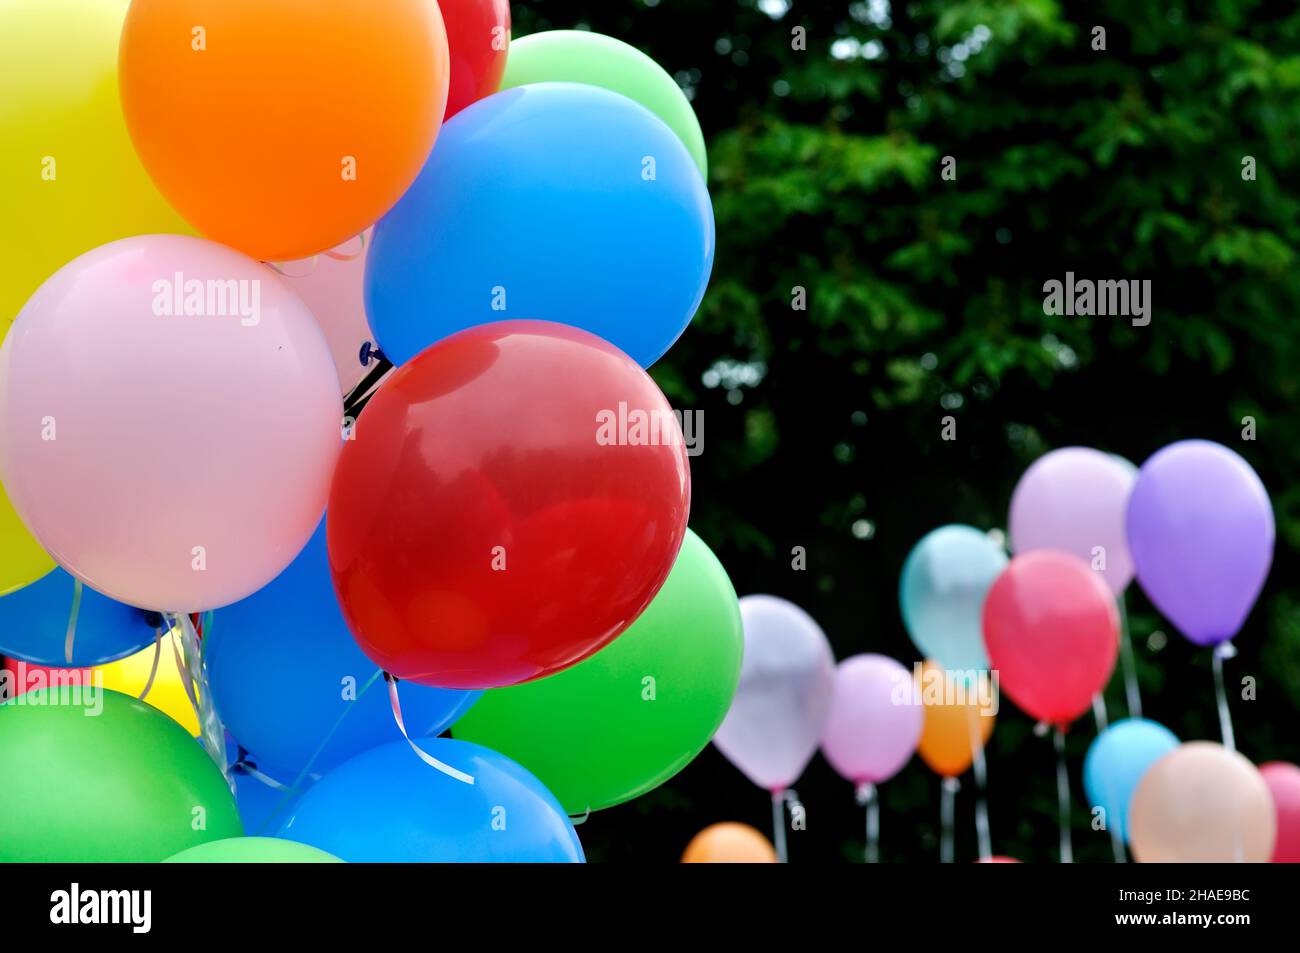 multicolored balloons in the city festival against trees background Stock Photo